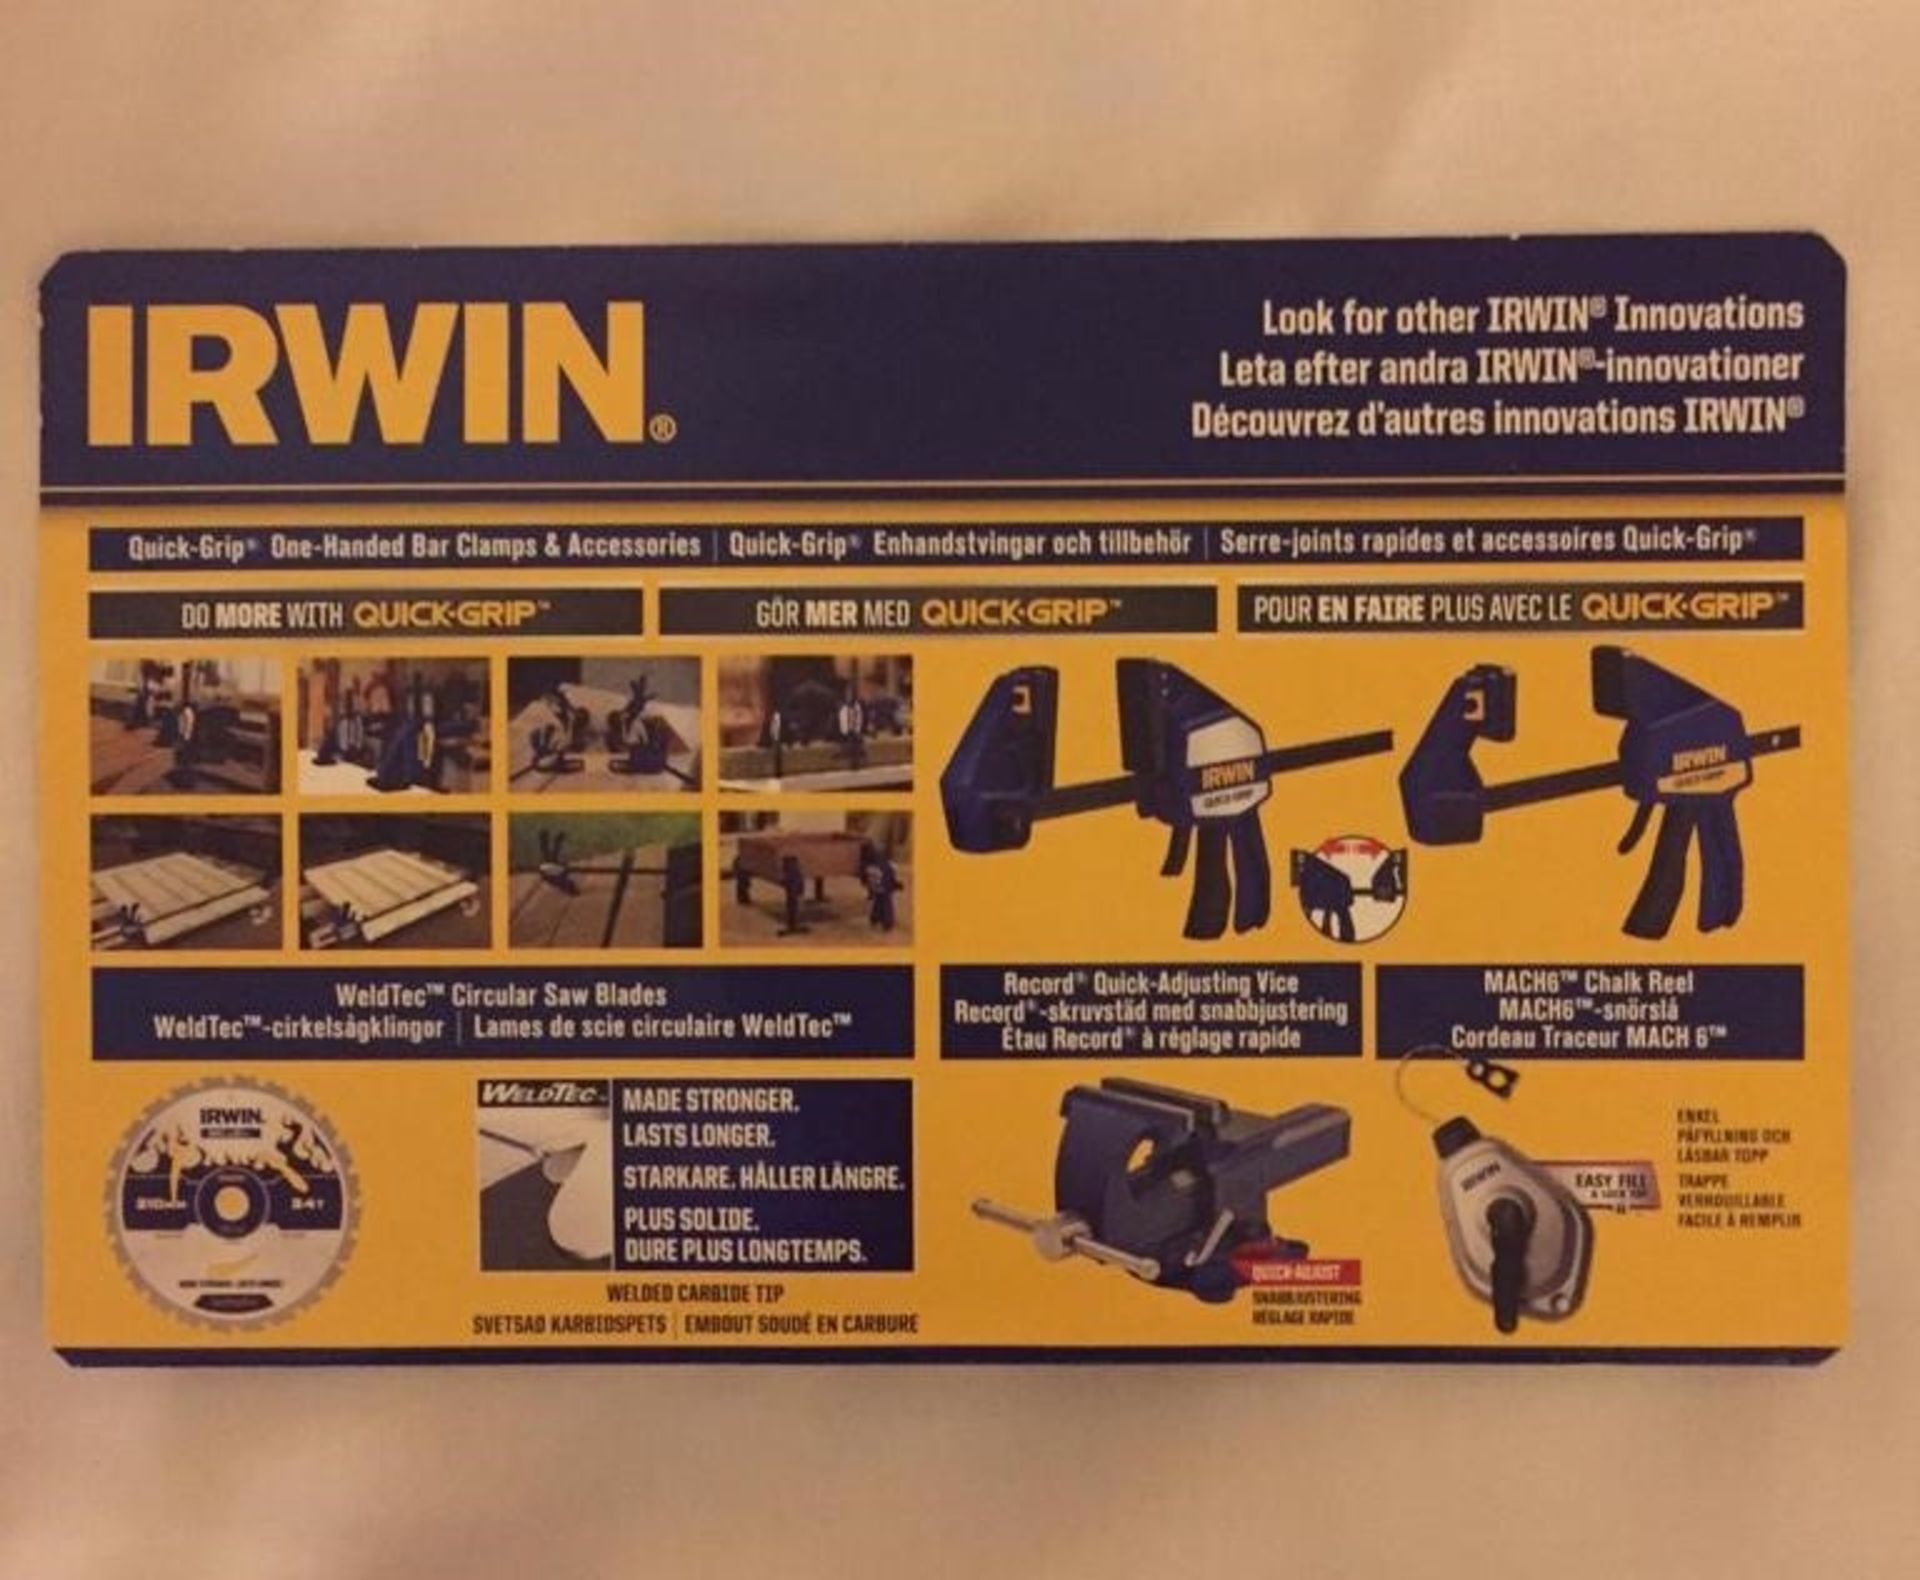 100 x Irwin Impact Drill Bit Sets with Magnetic Holder - RRP £650 - (REF: DJW) - Image 2 of 3